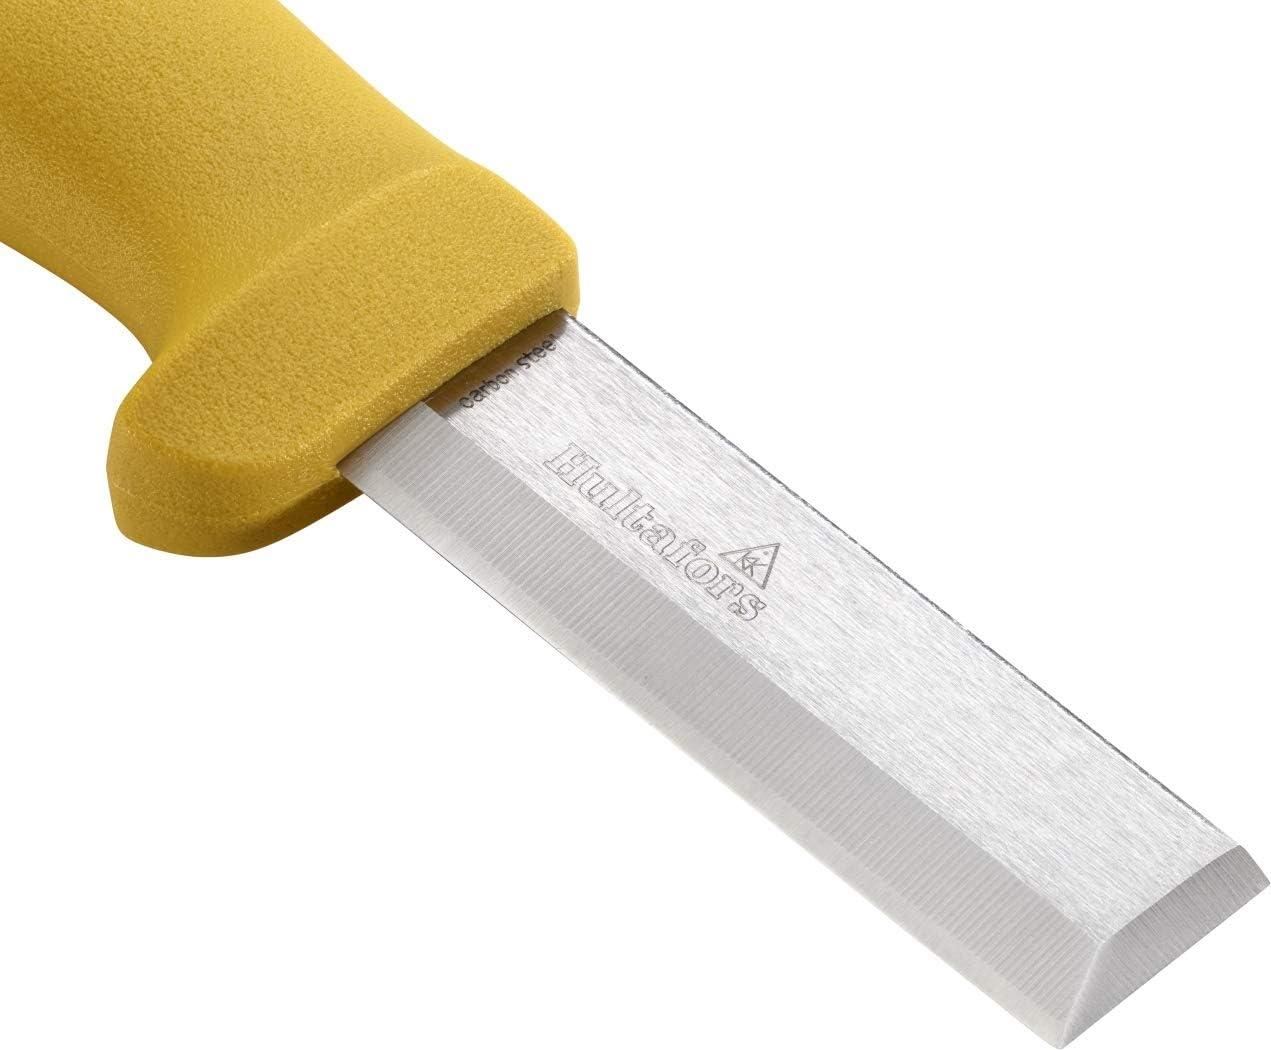 Hultafors STK Chisel Knife 380070 carbon  Advantageously shopping at